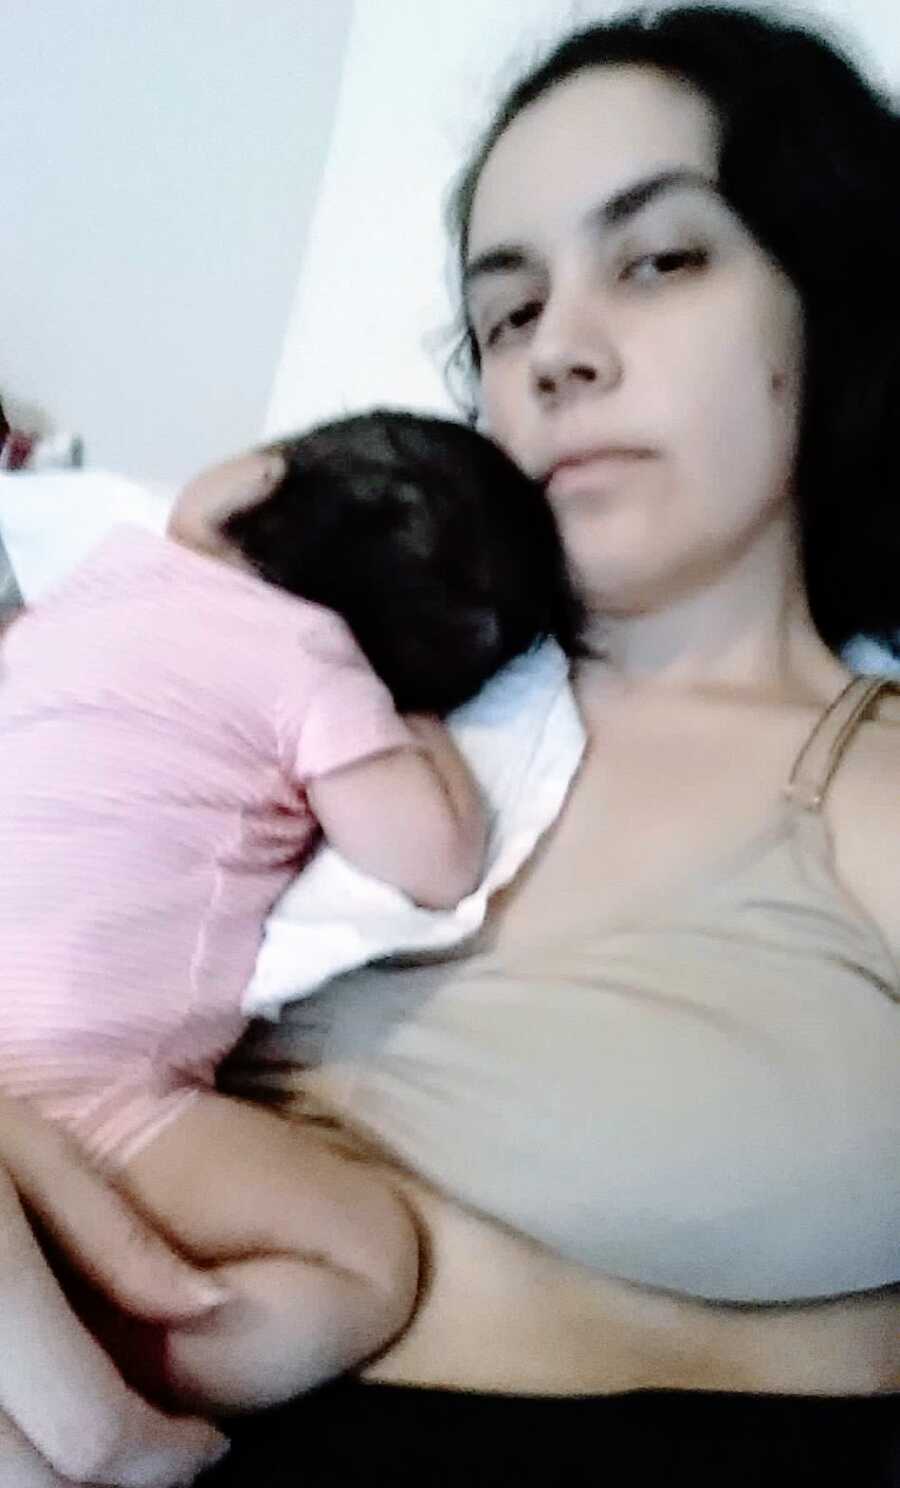 Mother with baby girl lying on her chest